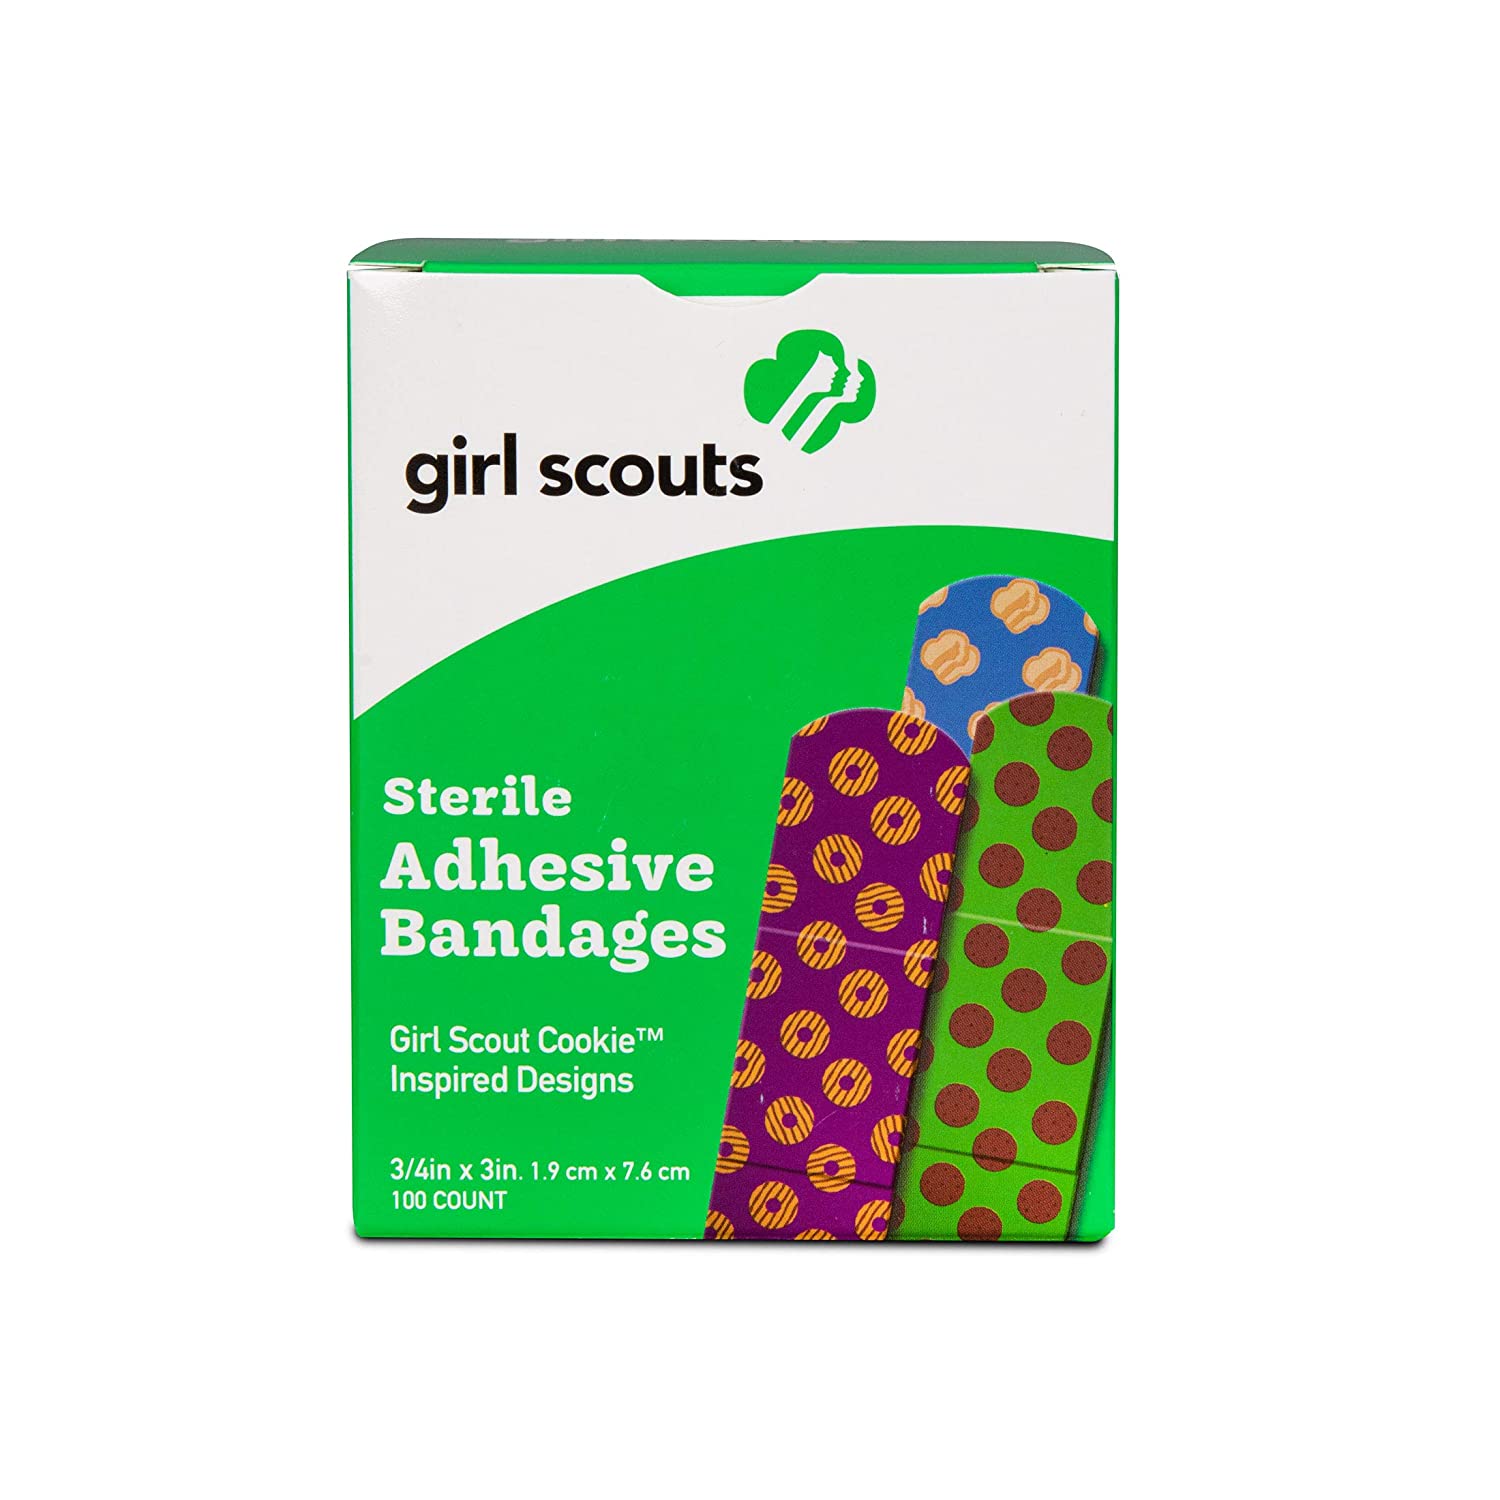 Dukal-1087751 Girl Scouts Adhesive Bandages, Assorted Styles, 3/4"x3" 100 Ct.